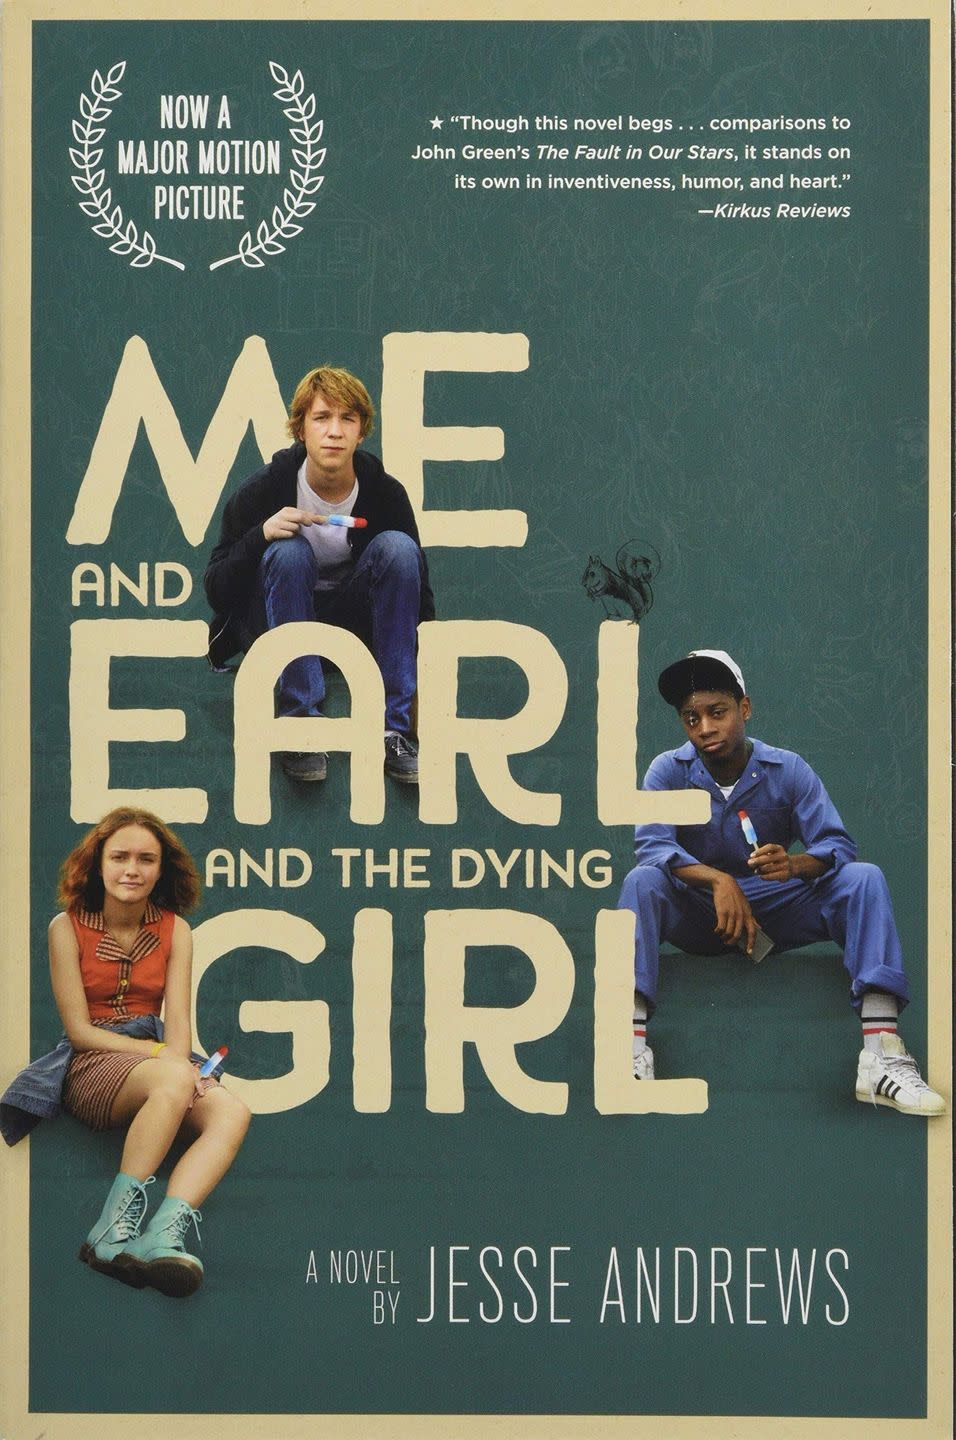 22) “Me and Earl and the Dying Girl” by Jesse Andrews